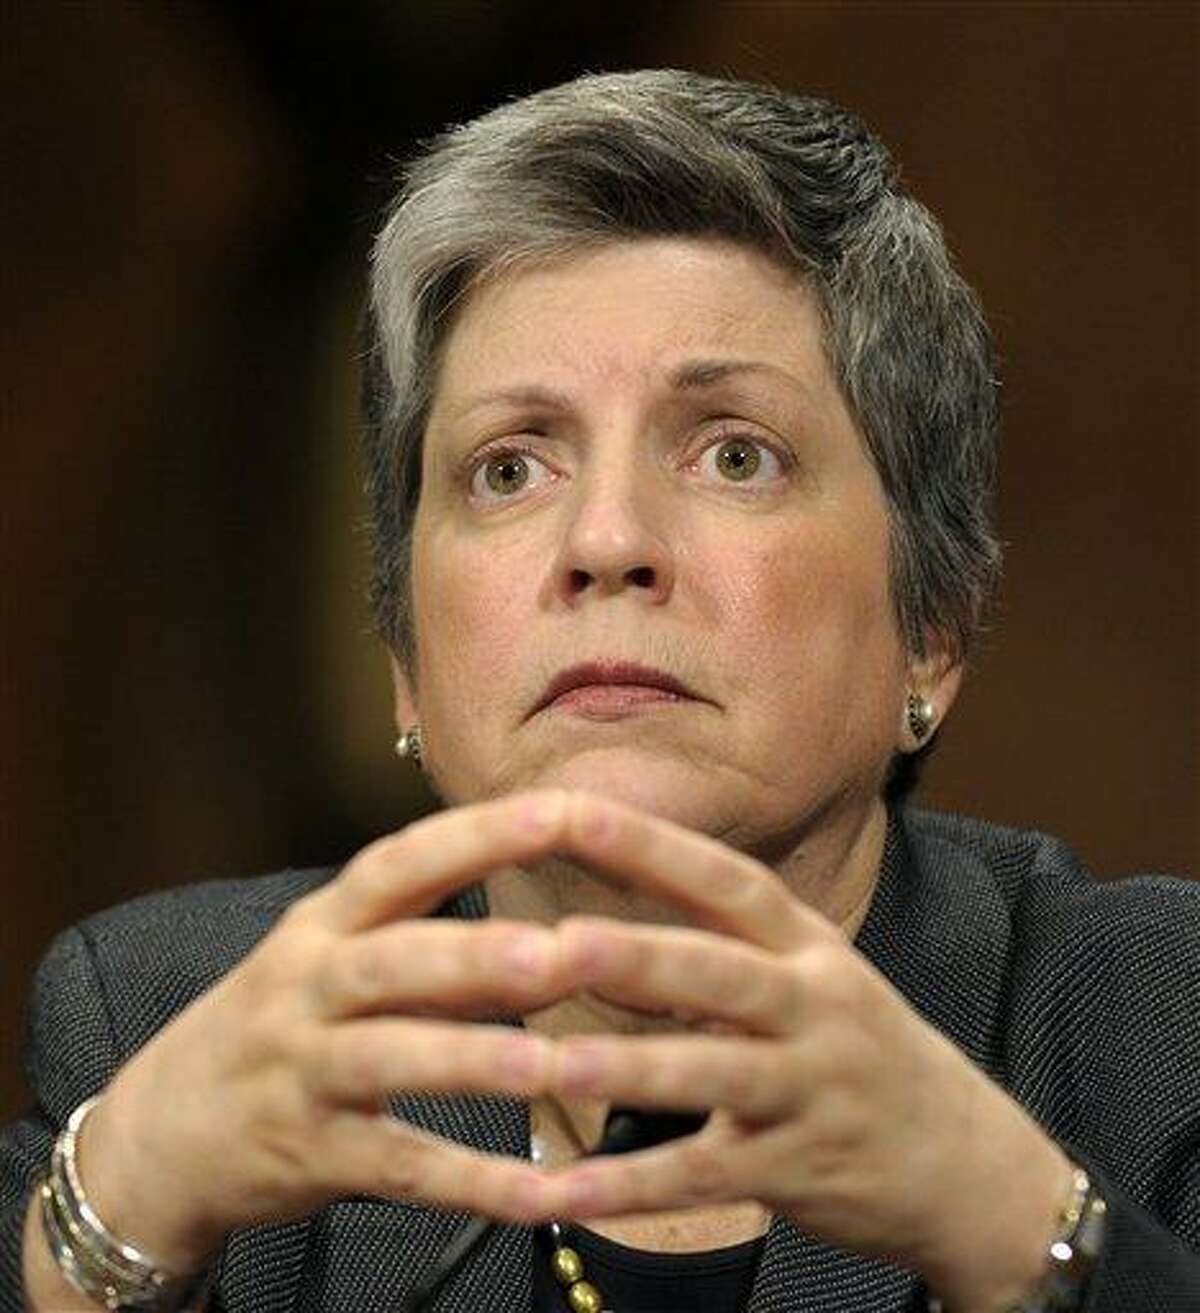 In this April 25 file photo, Homeland Security Secretary Janet Napolitano testifies on Capitol Hill in Washington before the Senate Judiciary Committee hearing on the Secret Service prostitution scandal. Seeking to shake the disgrace of a prostitution scandal, the Secret Service late Friday tightened conduct rules for its agents to prohibit them from drinking excessively, visiting disreputable establishments while traveling or bringing foreigners to their hotel rooms. Associated Press